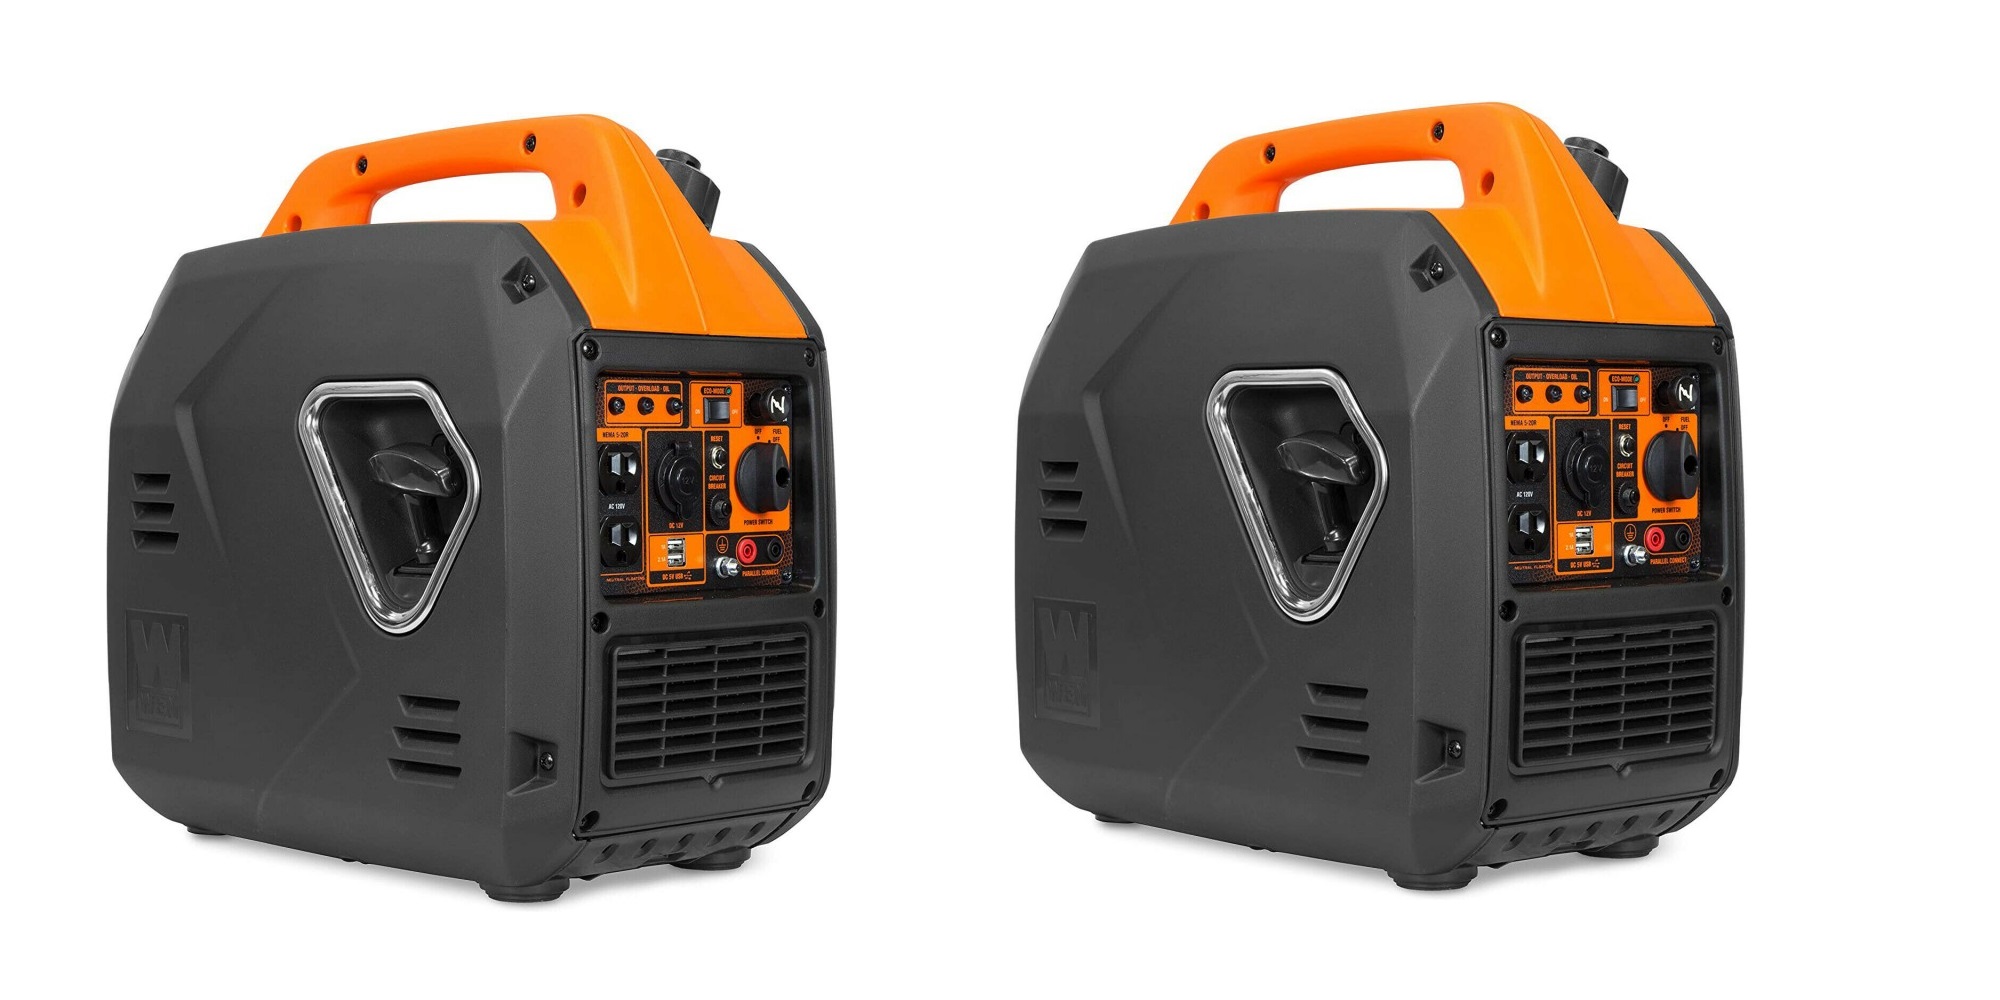 What's A Portable Inverter Generator & Where Can I Use It?